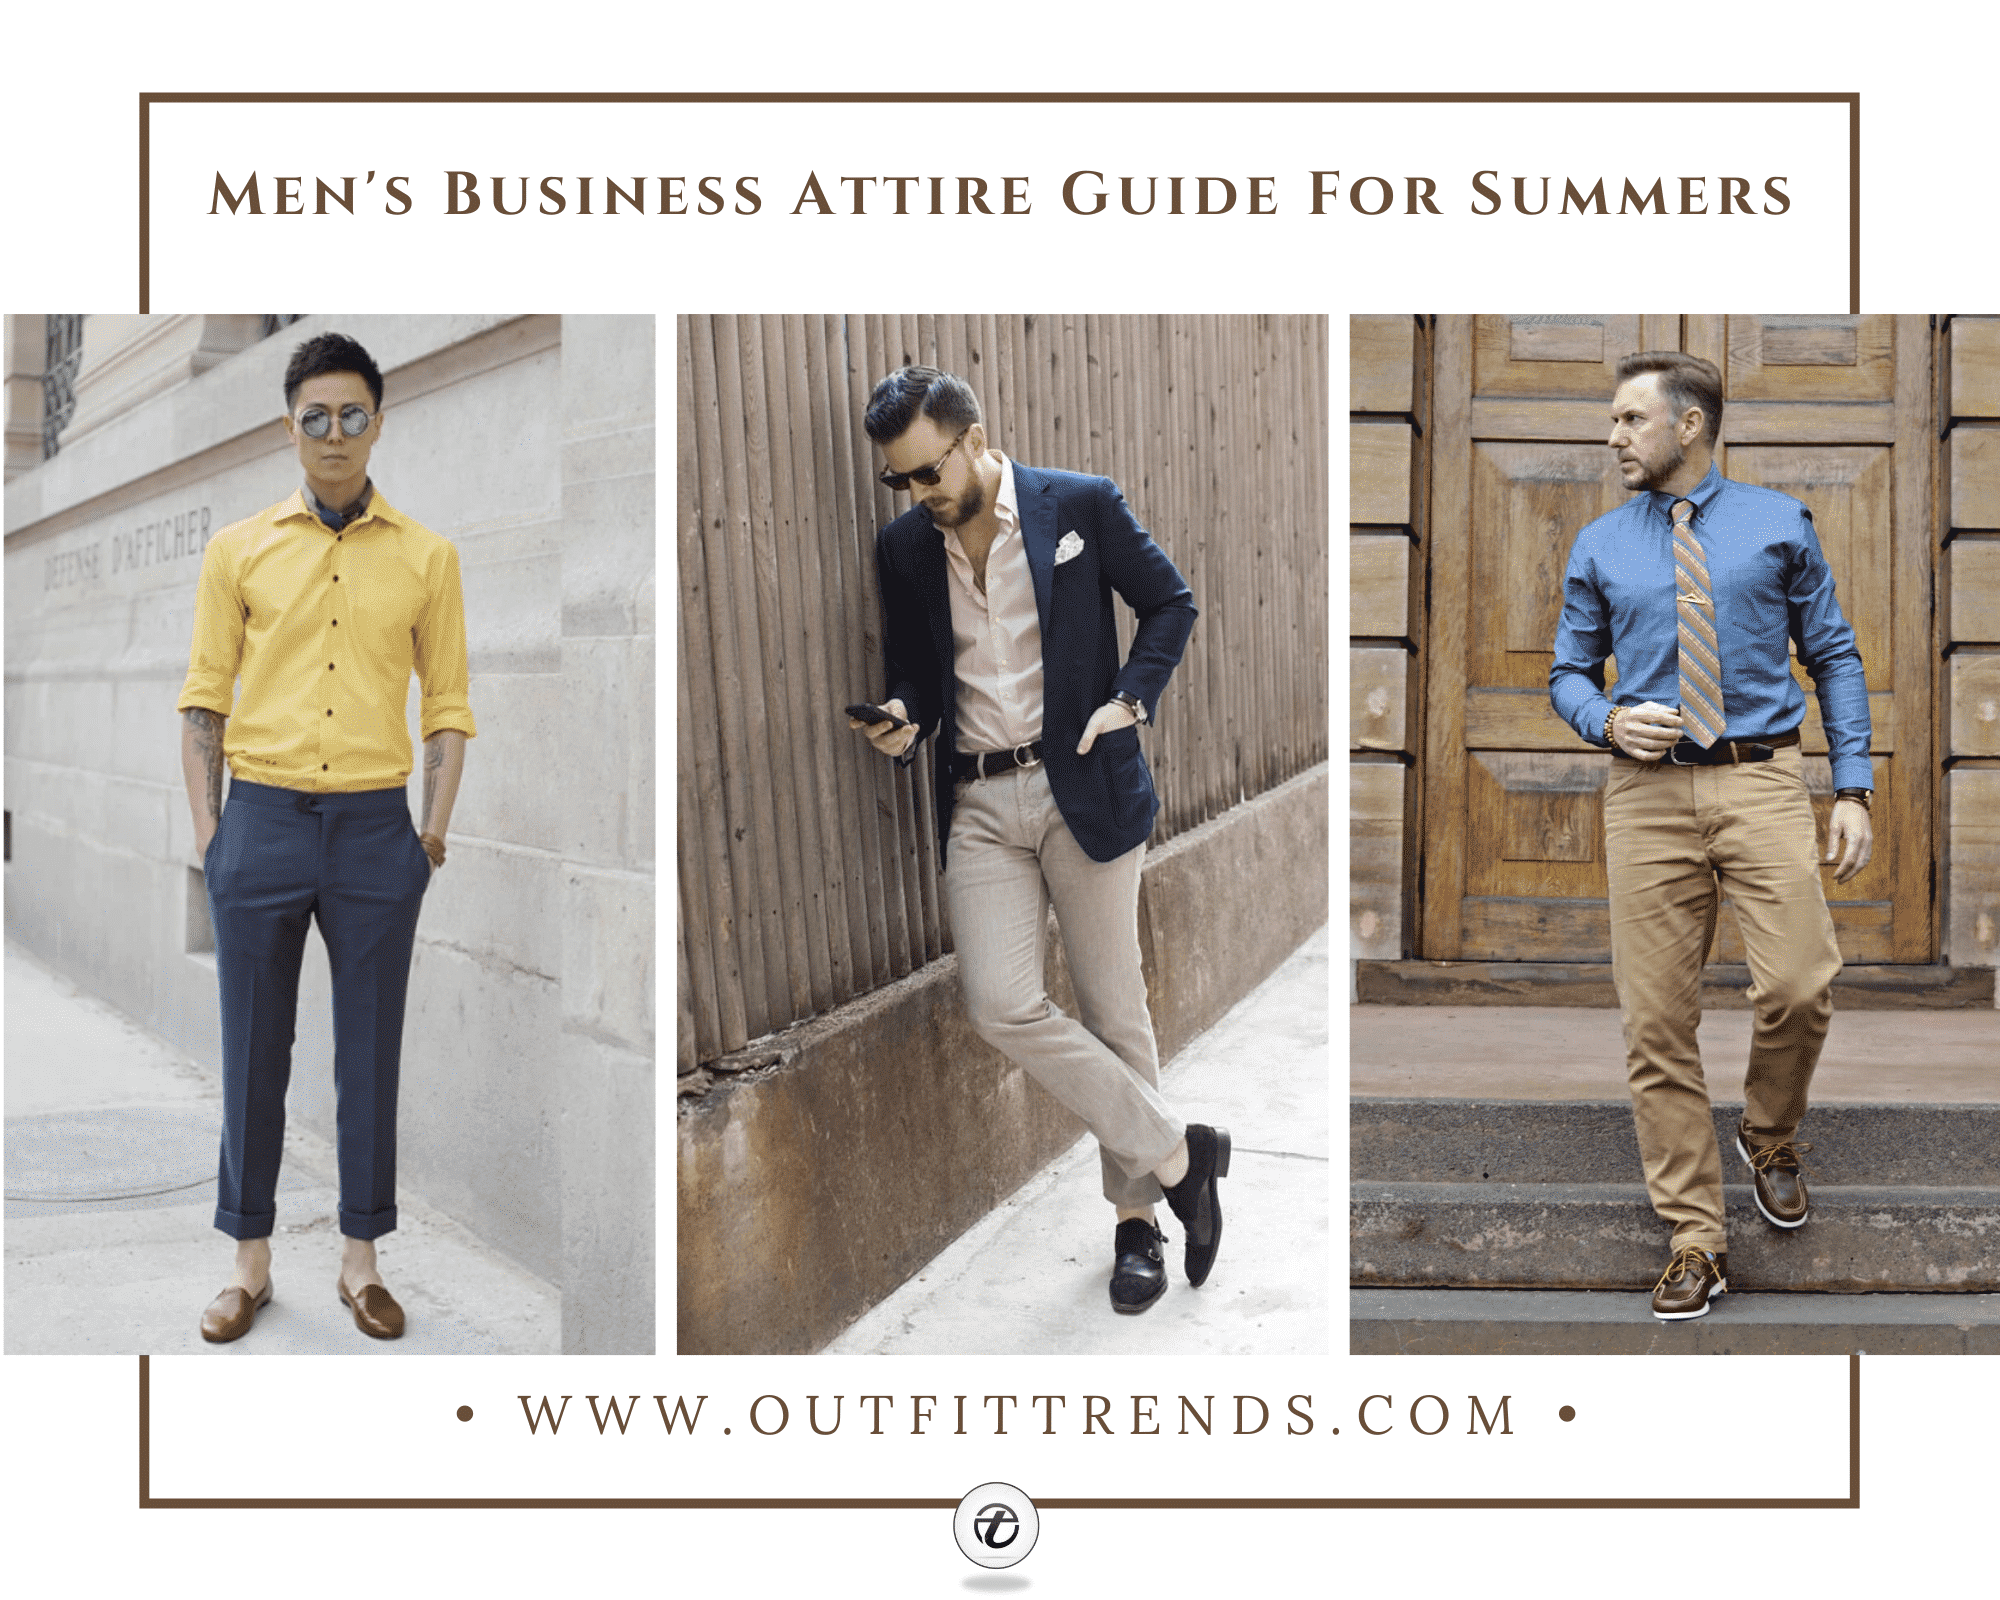 30 Best Summer Business Attire Ideas for Men To Try In 2021